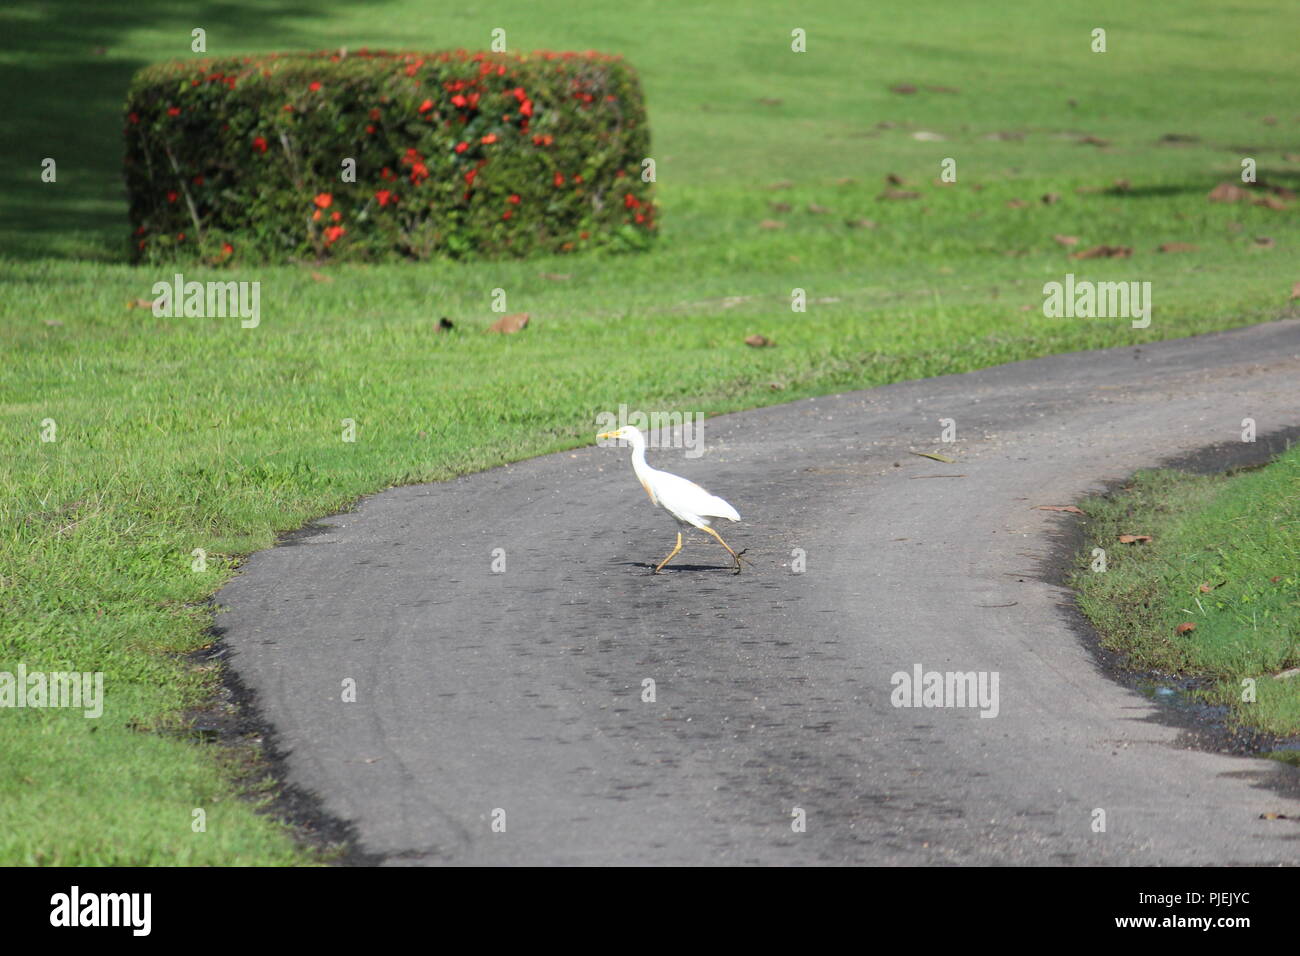 White bird crossing the road with a red flowering bush in the background Stock Photo